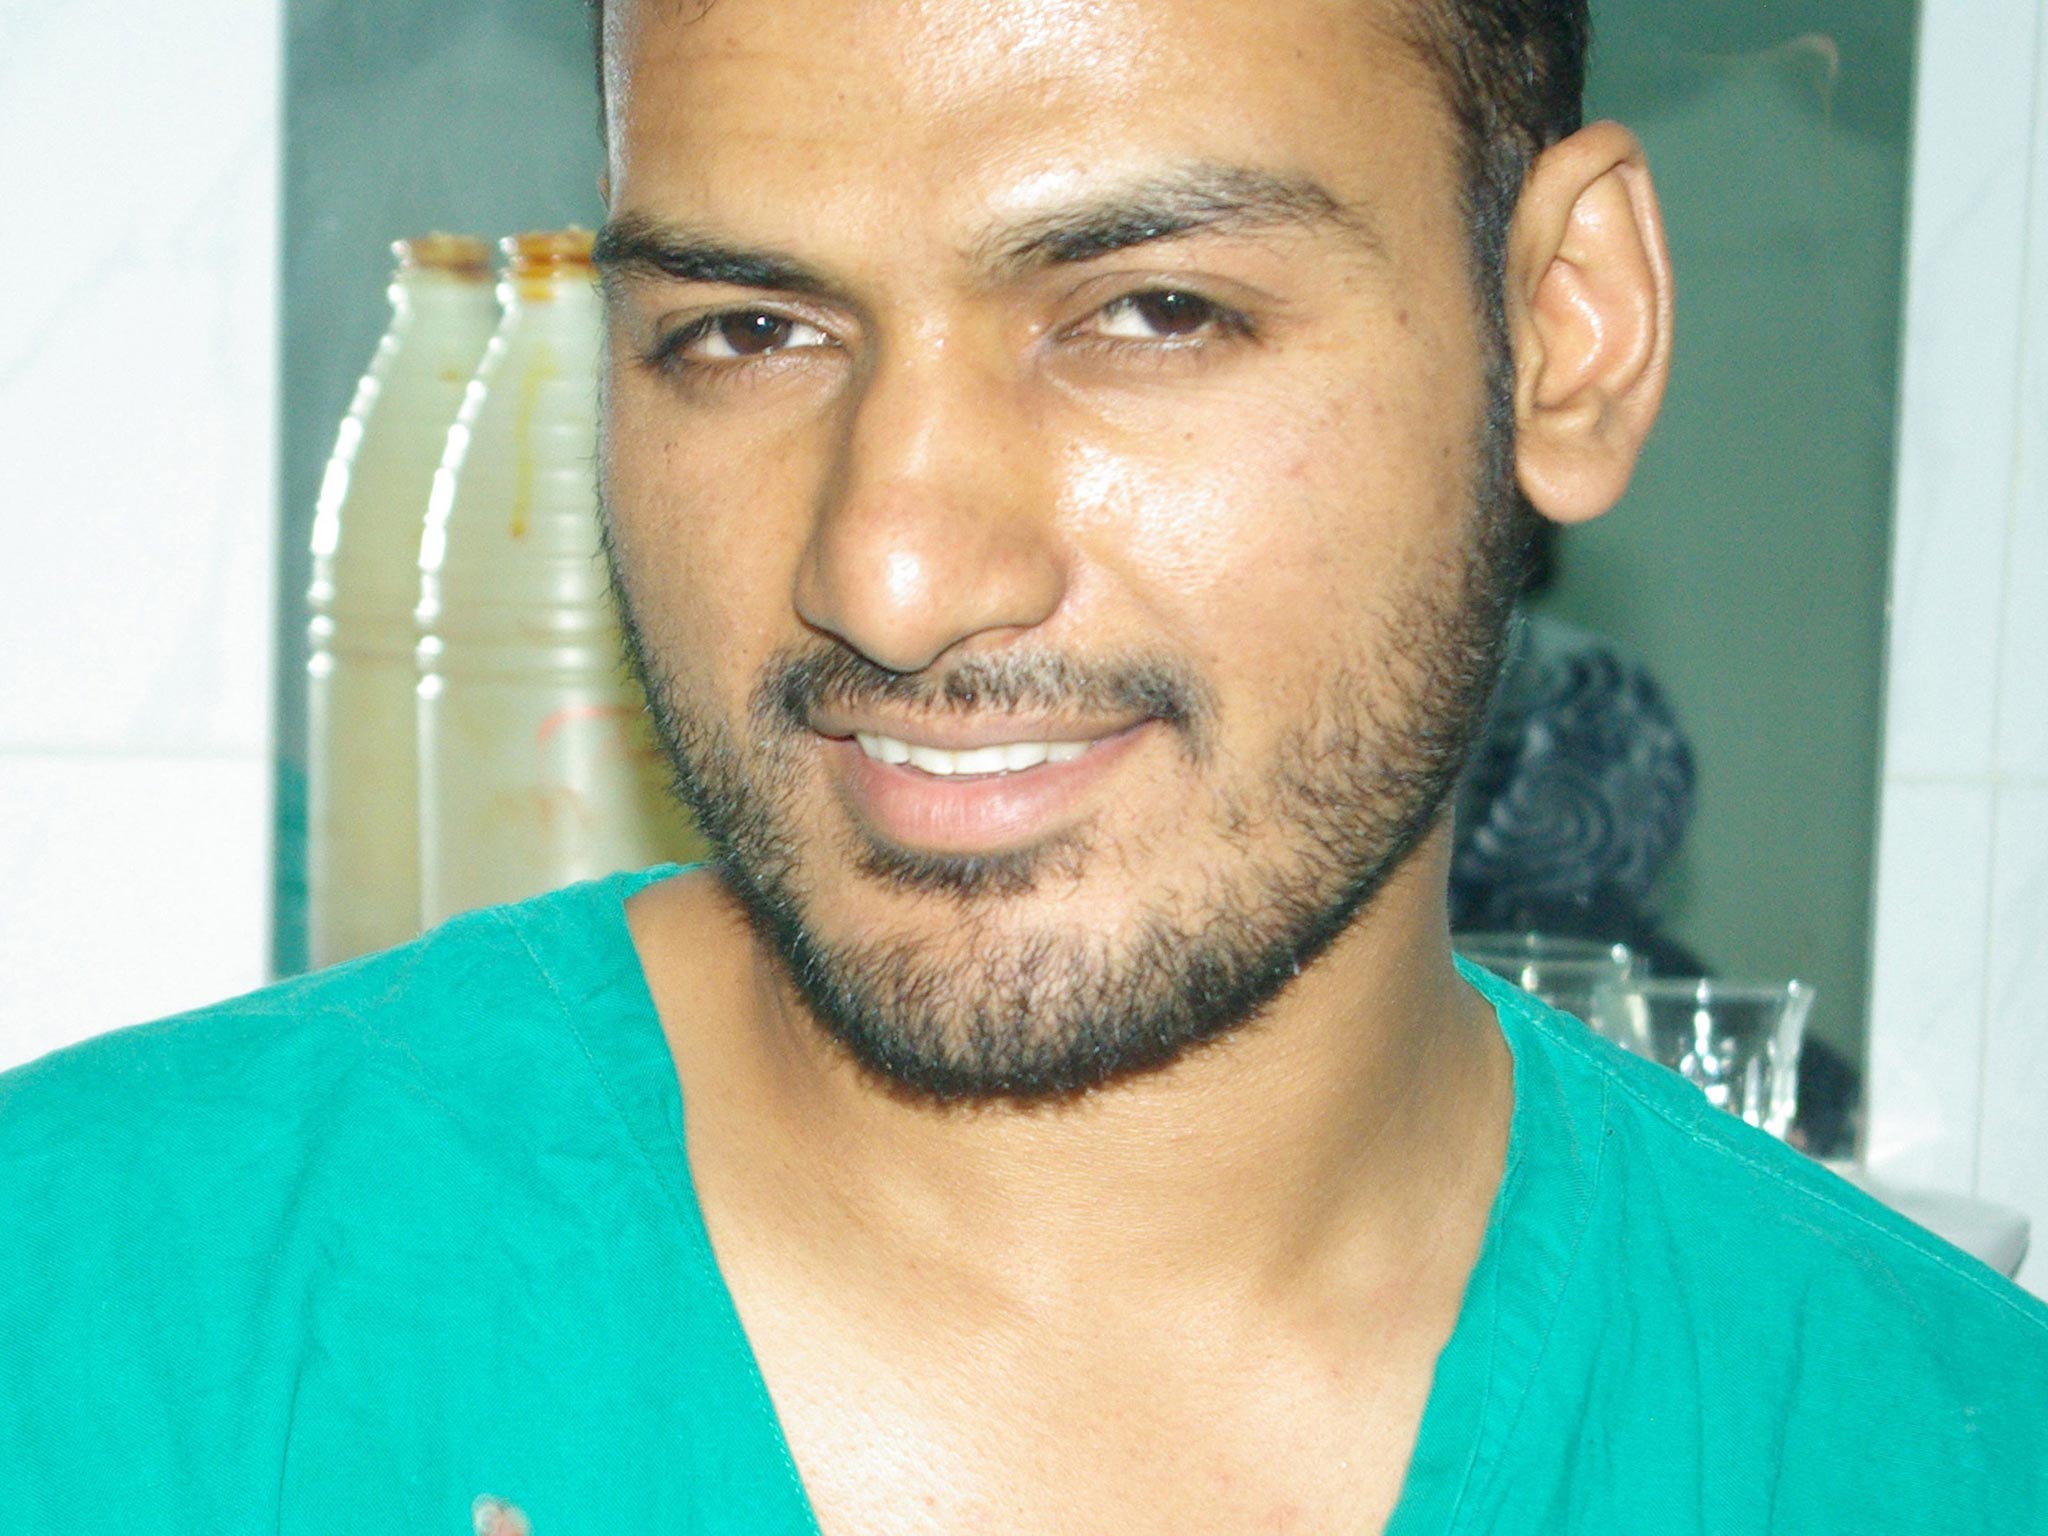 Dr Abbas Khan who died while being held in custody in Syria.